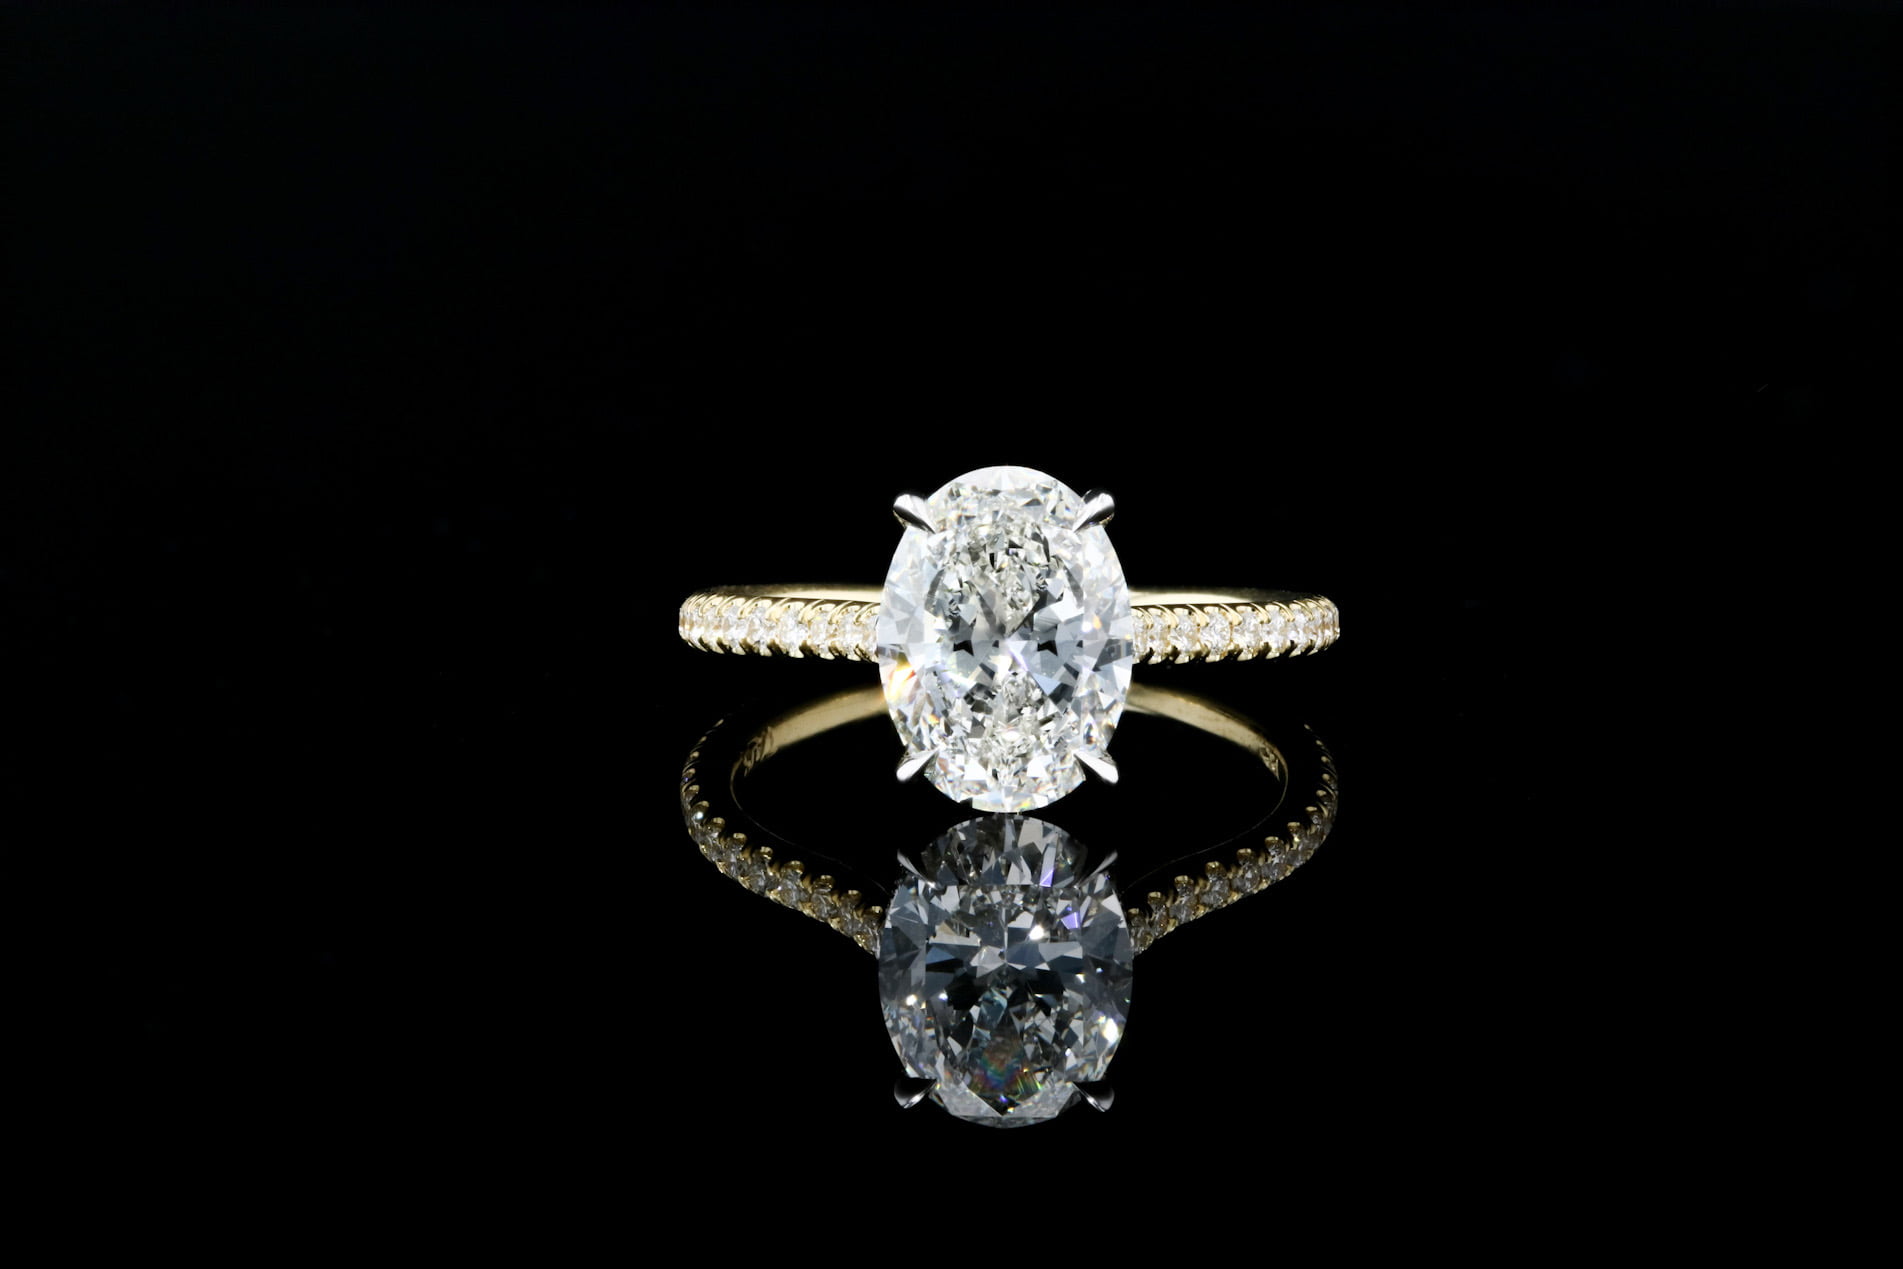 Vintage Filigree Solitaire Engagement Ring, TRB 0.81ct.